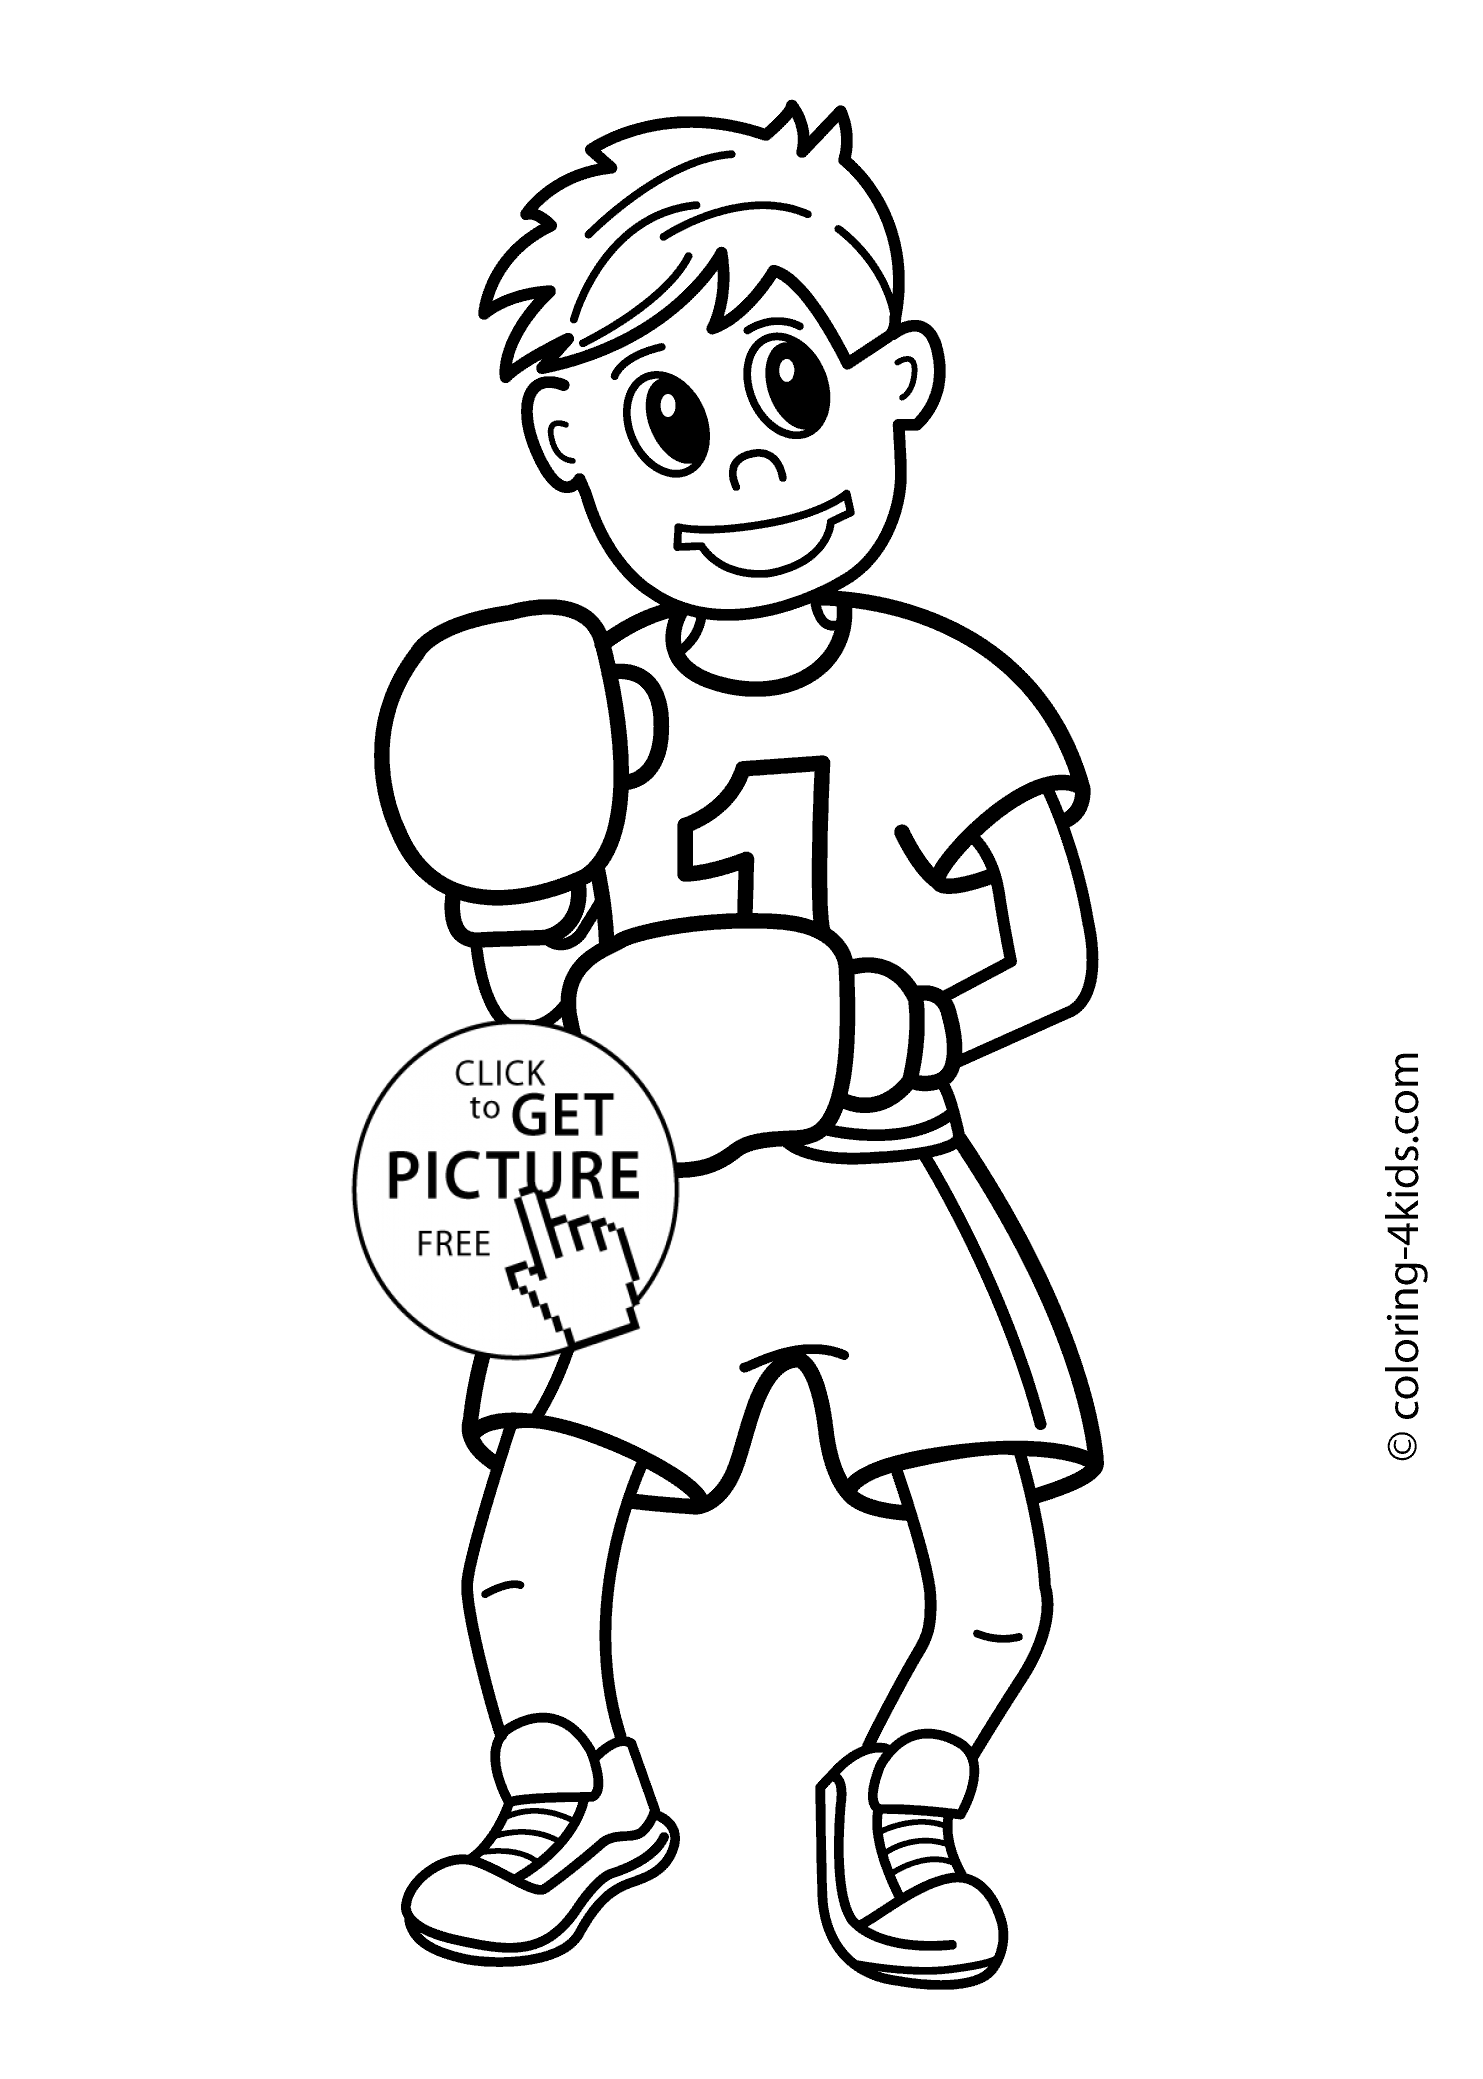 Boxing sport coloring page for kids, printable free | coloing-4kids.com